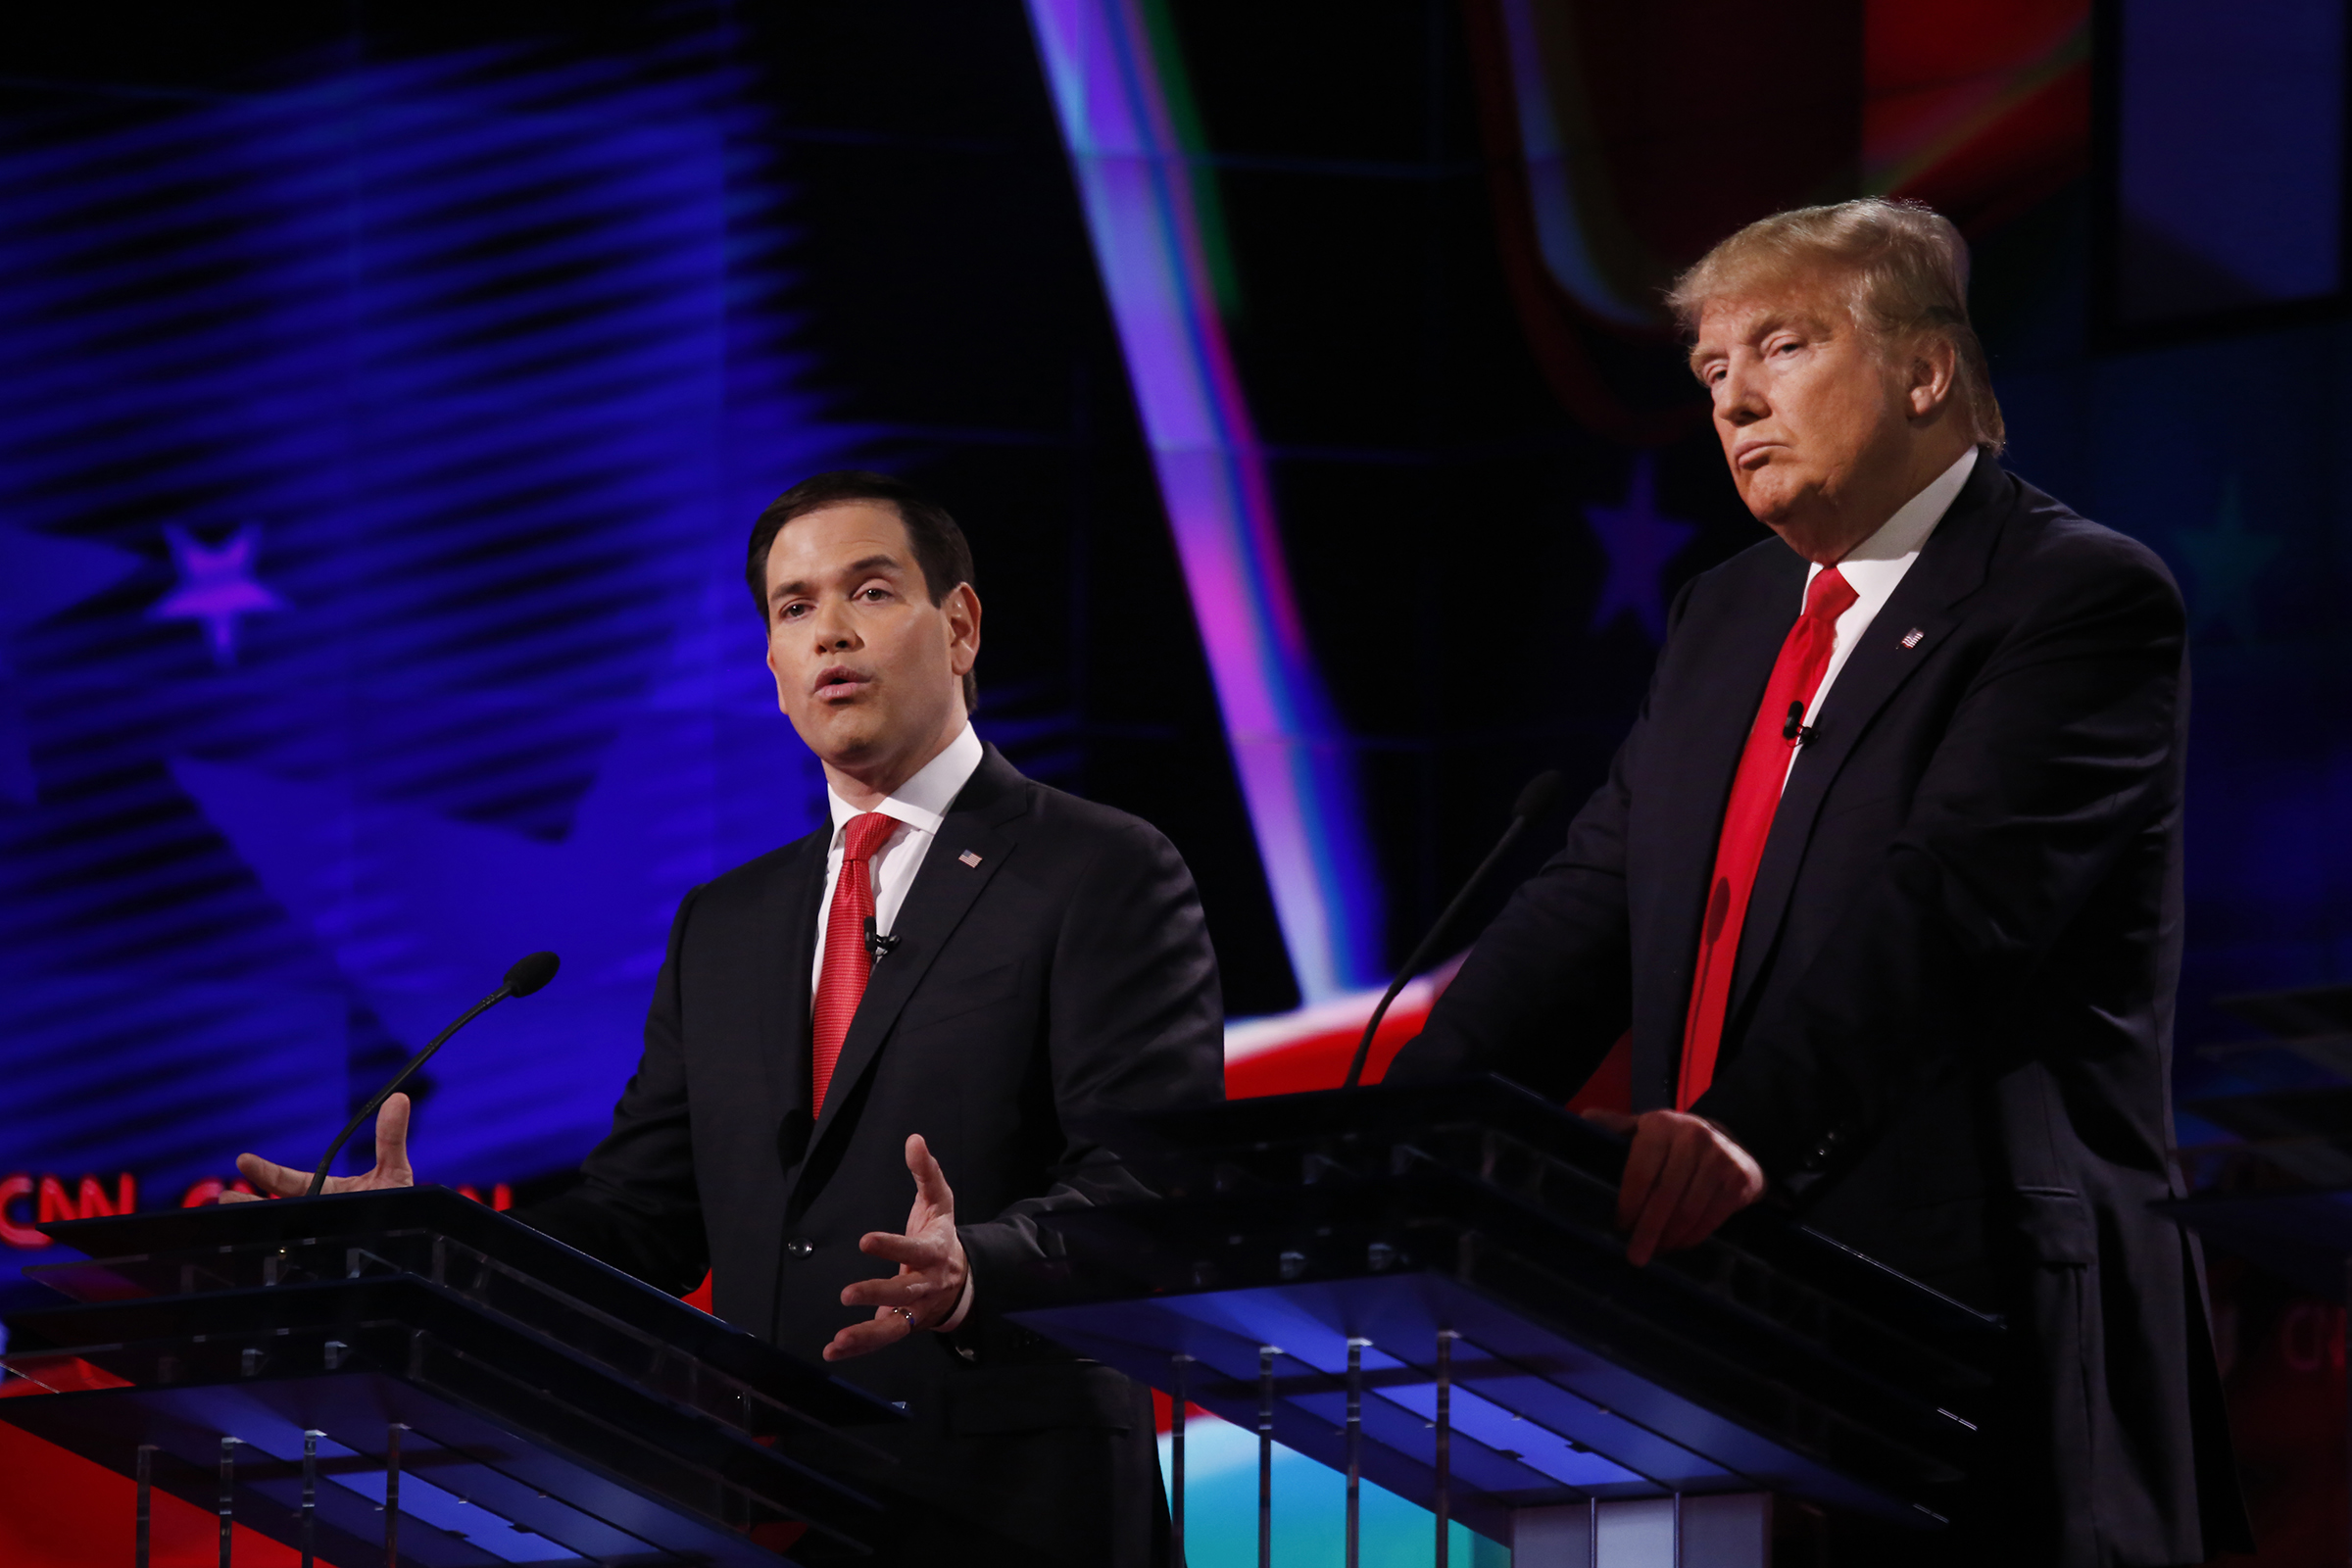 The four remaining Republican primary candidates Marco Rubio and Donald Trump debate at the University of Miami on March 10, 2016.